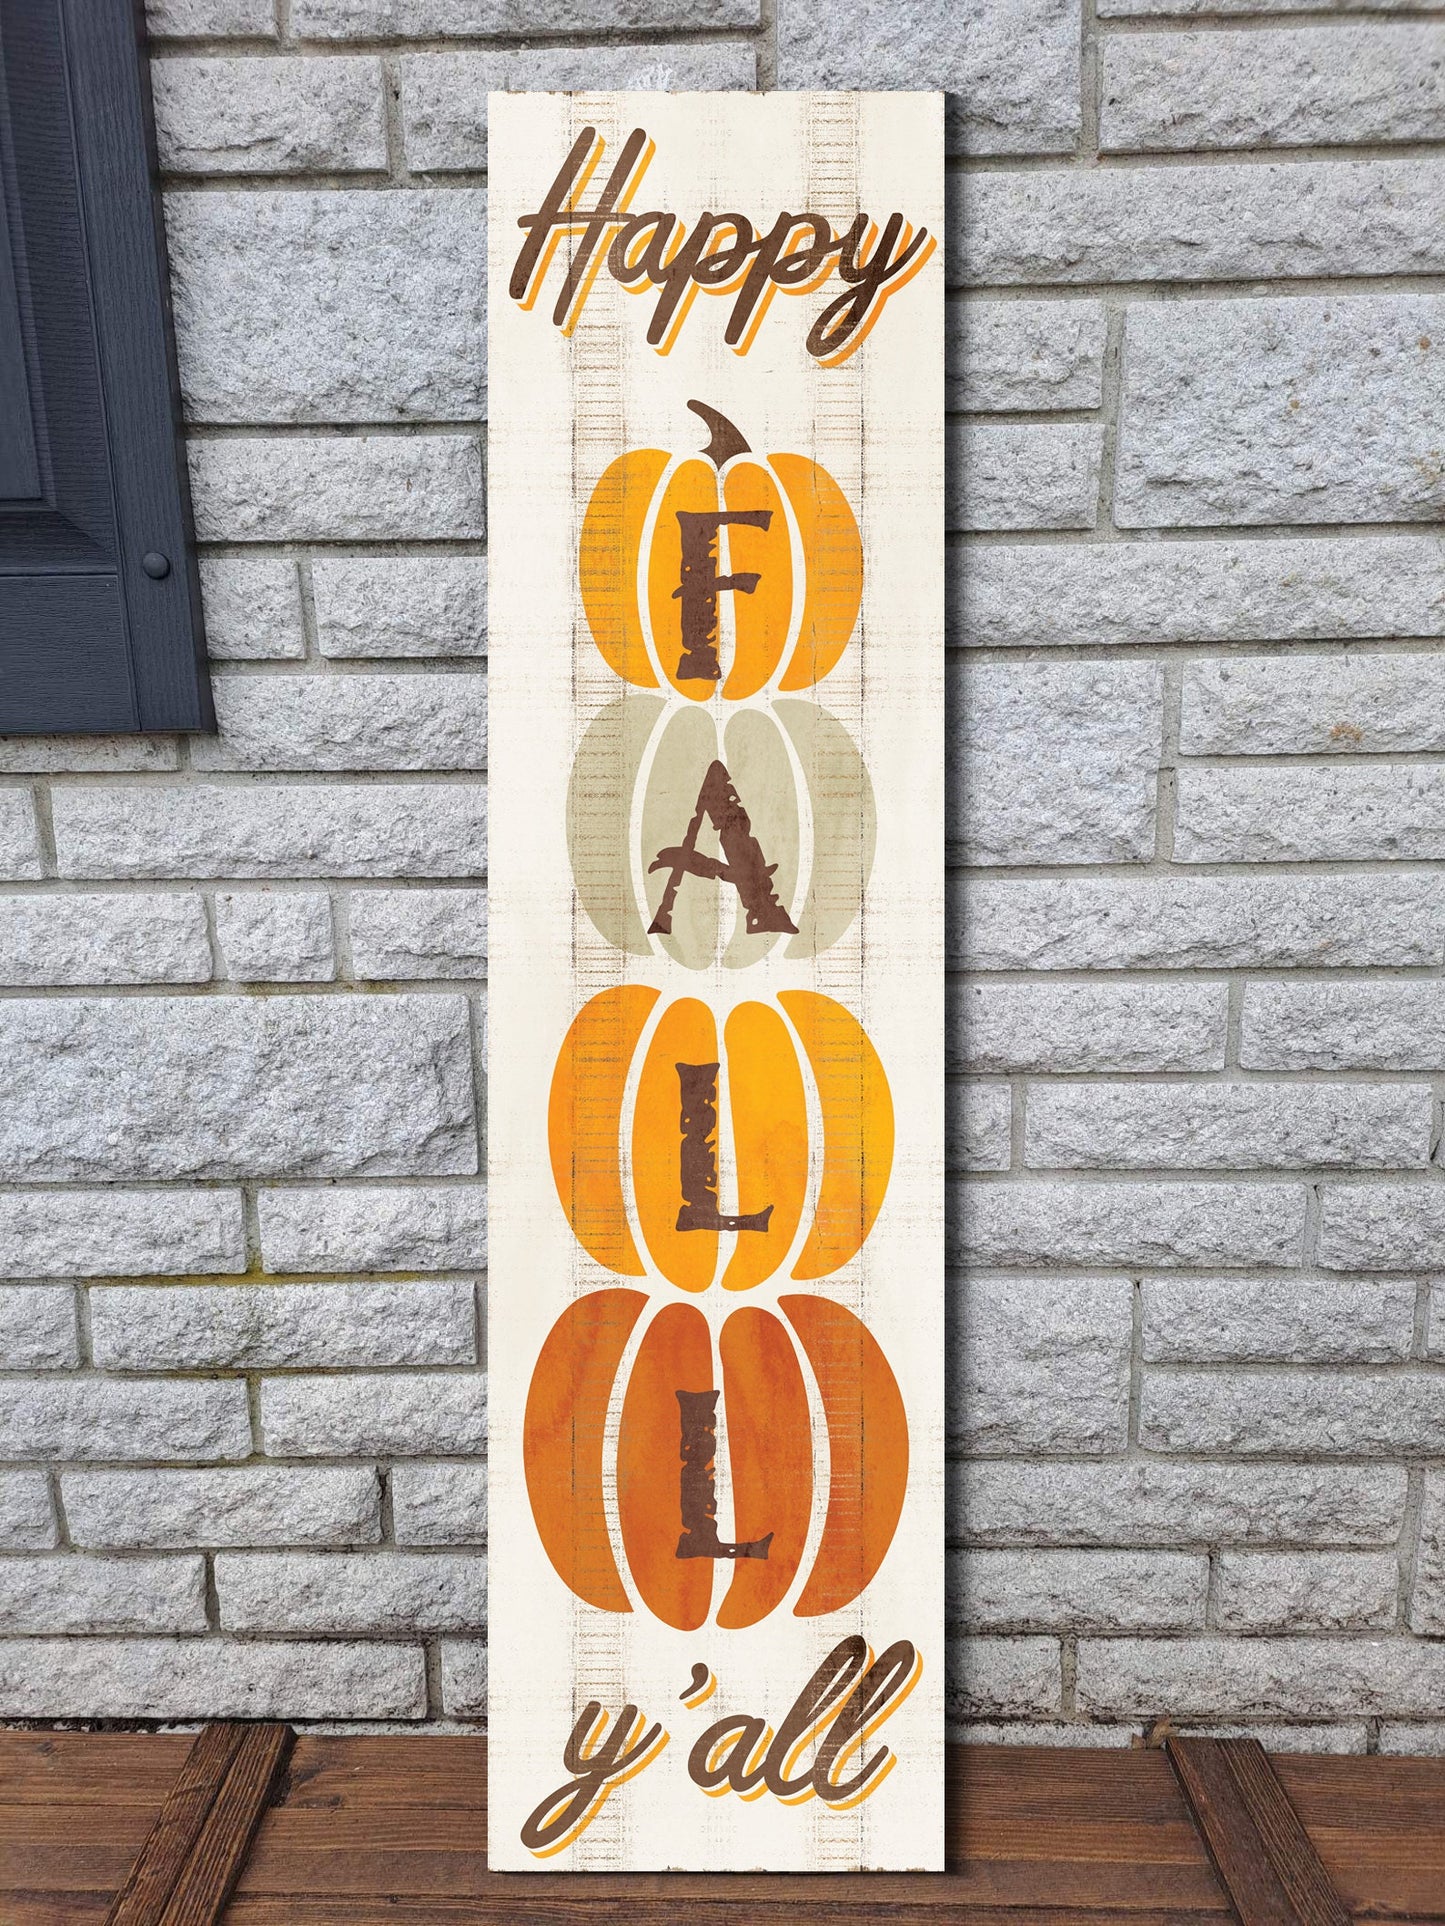 36in "Happy Fall Y'all" Wooden Porch Sign Seasonal Front Door Display | Perfect for Autumn Celebrations | Rustic Decor